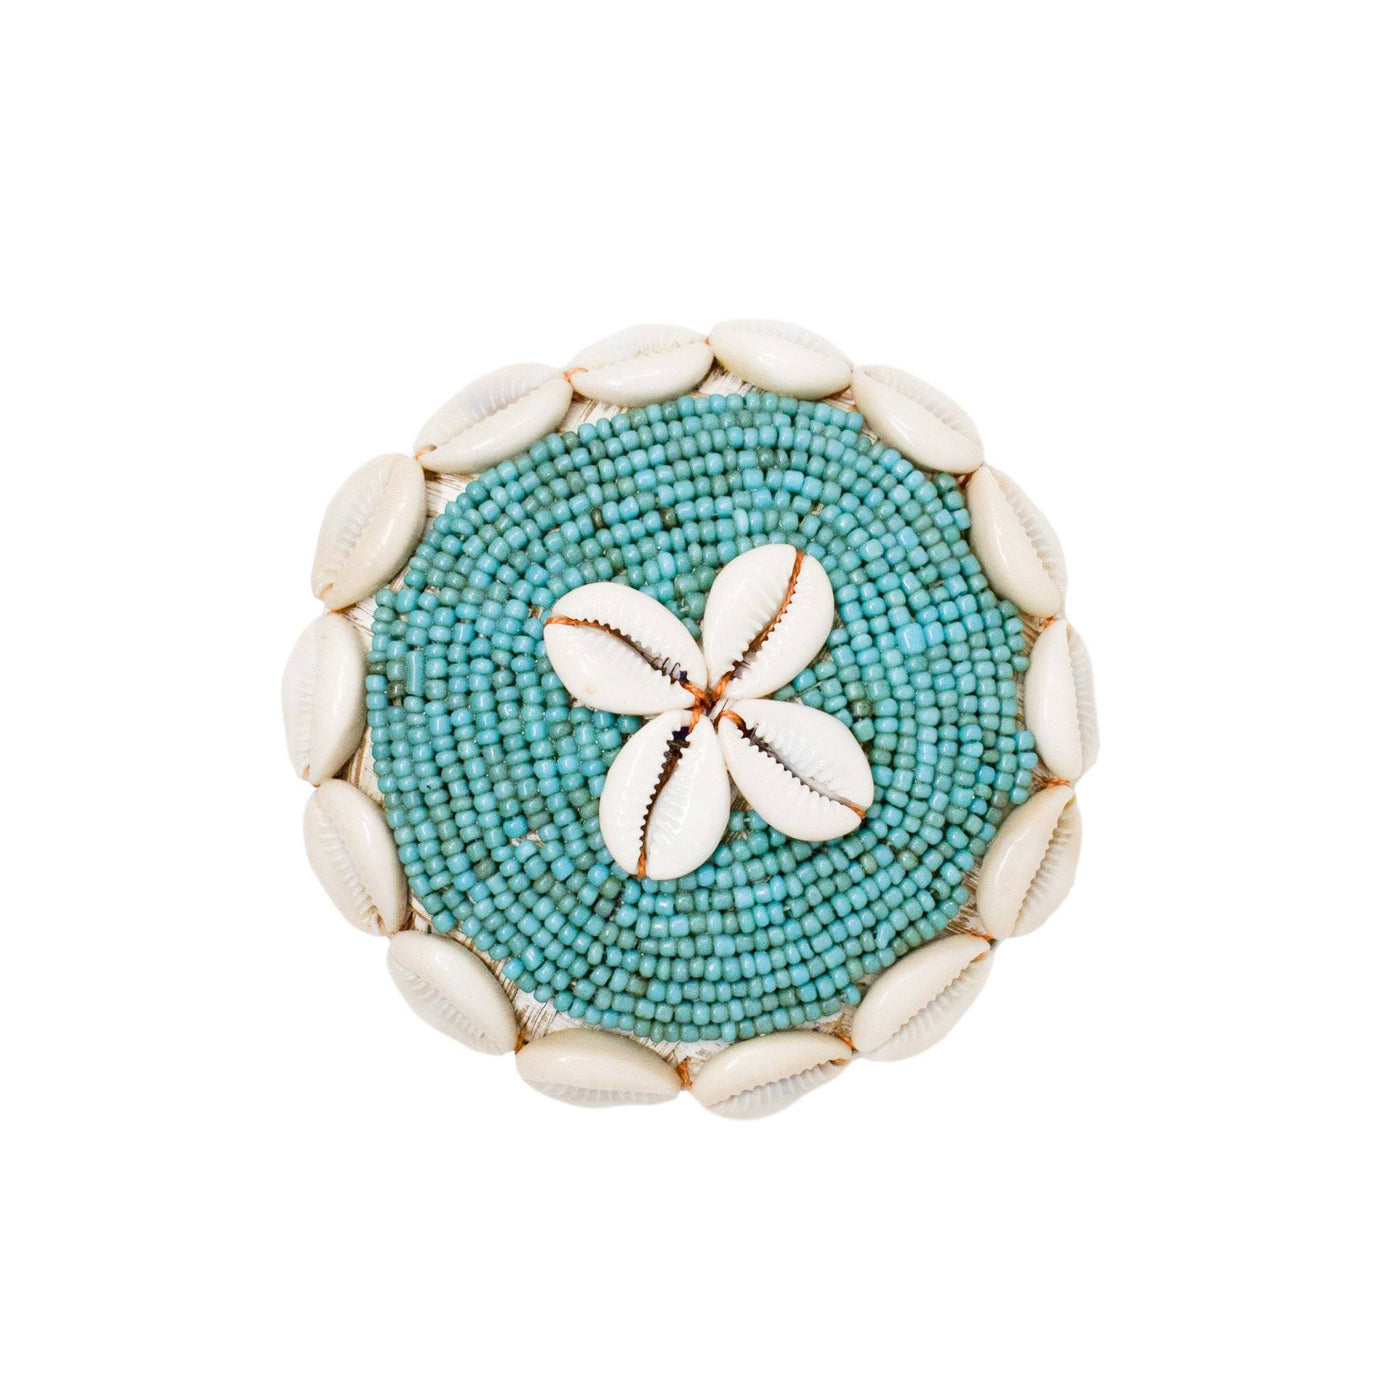 Gili Shell Bowl with Lid - Turquoise by POPPY + SAGE